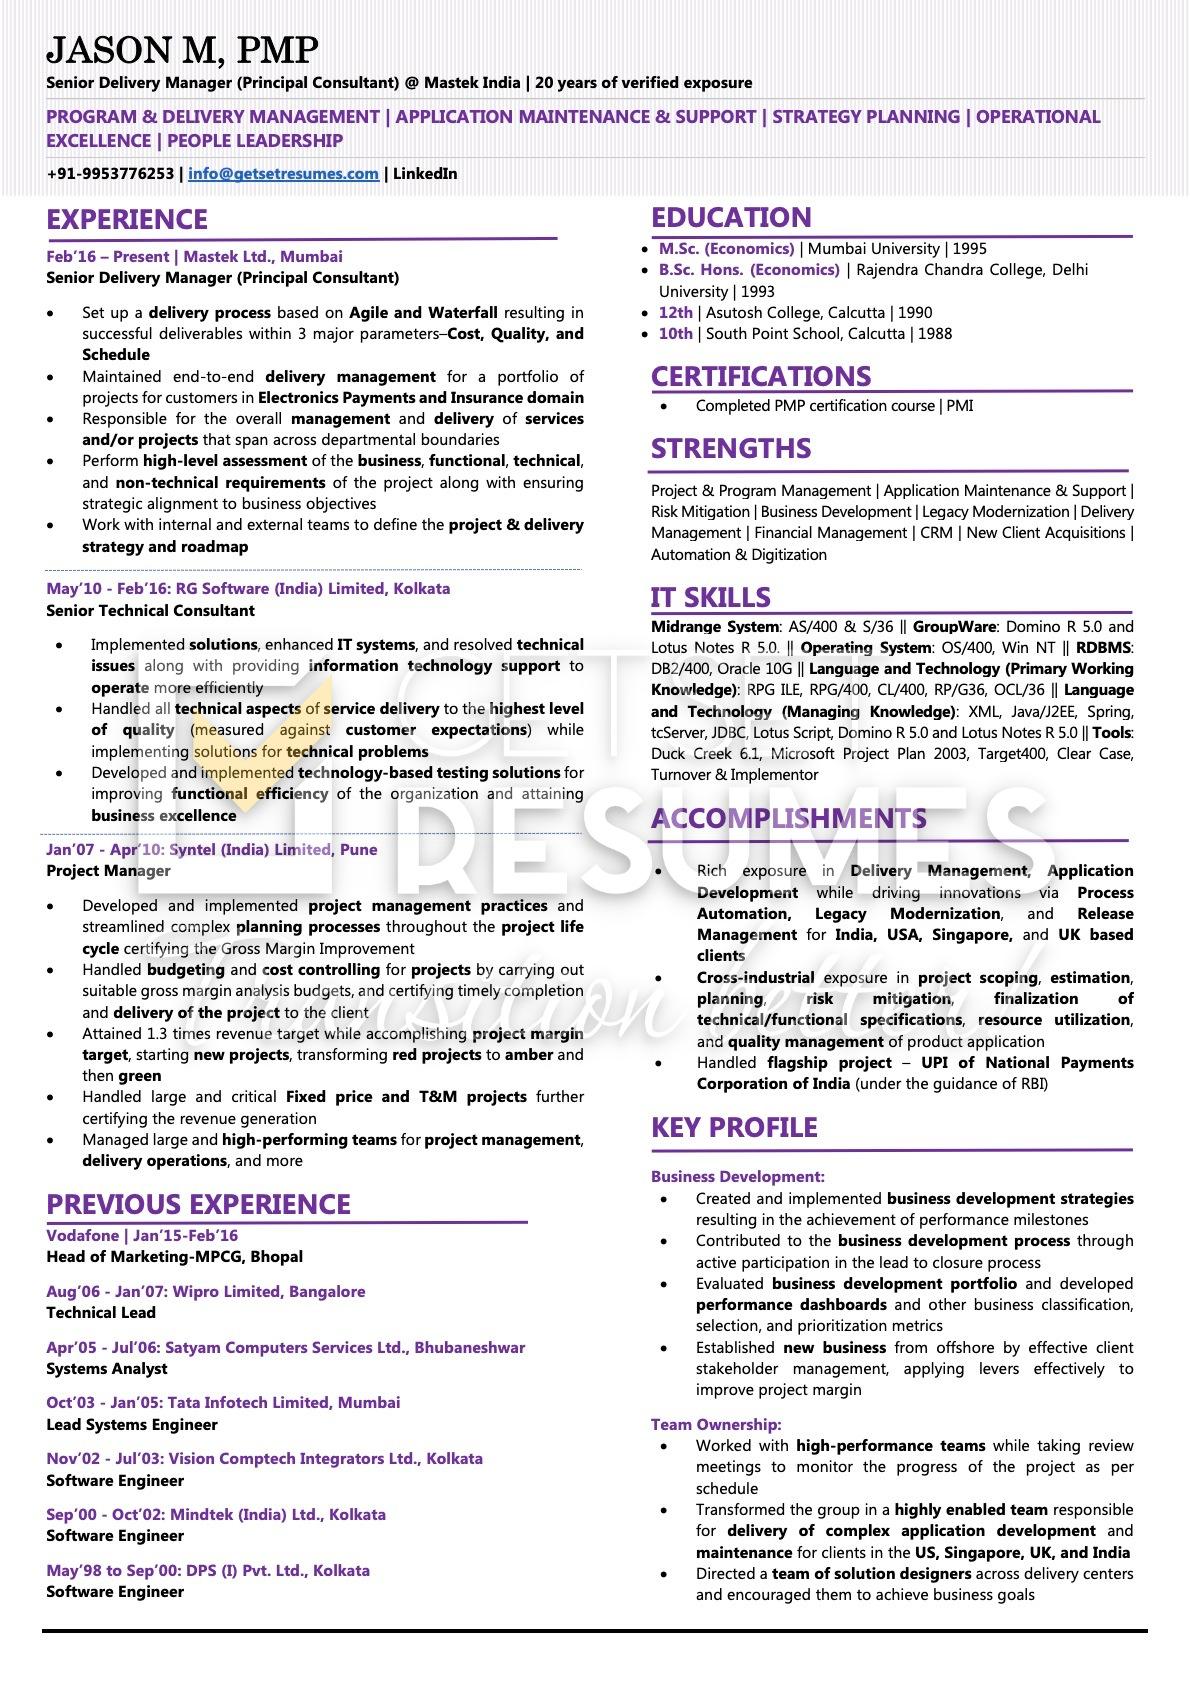 Sample Resume of Senior Delivery Manager Software with 20 years experience by getsetResumes